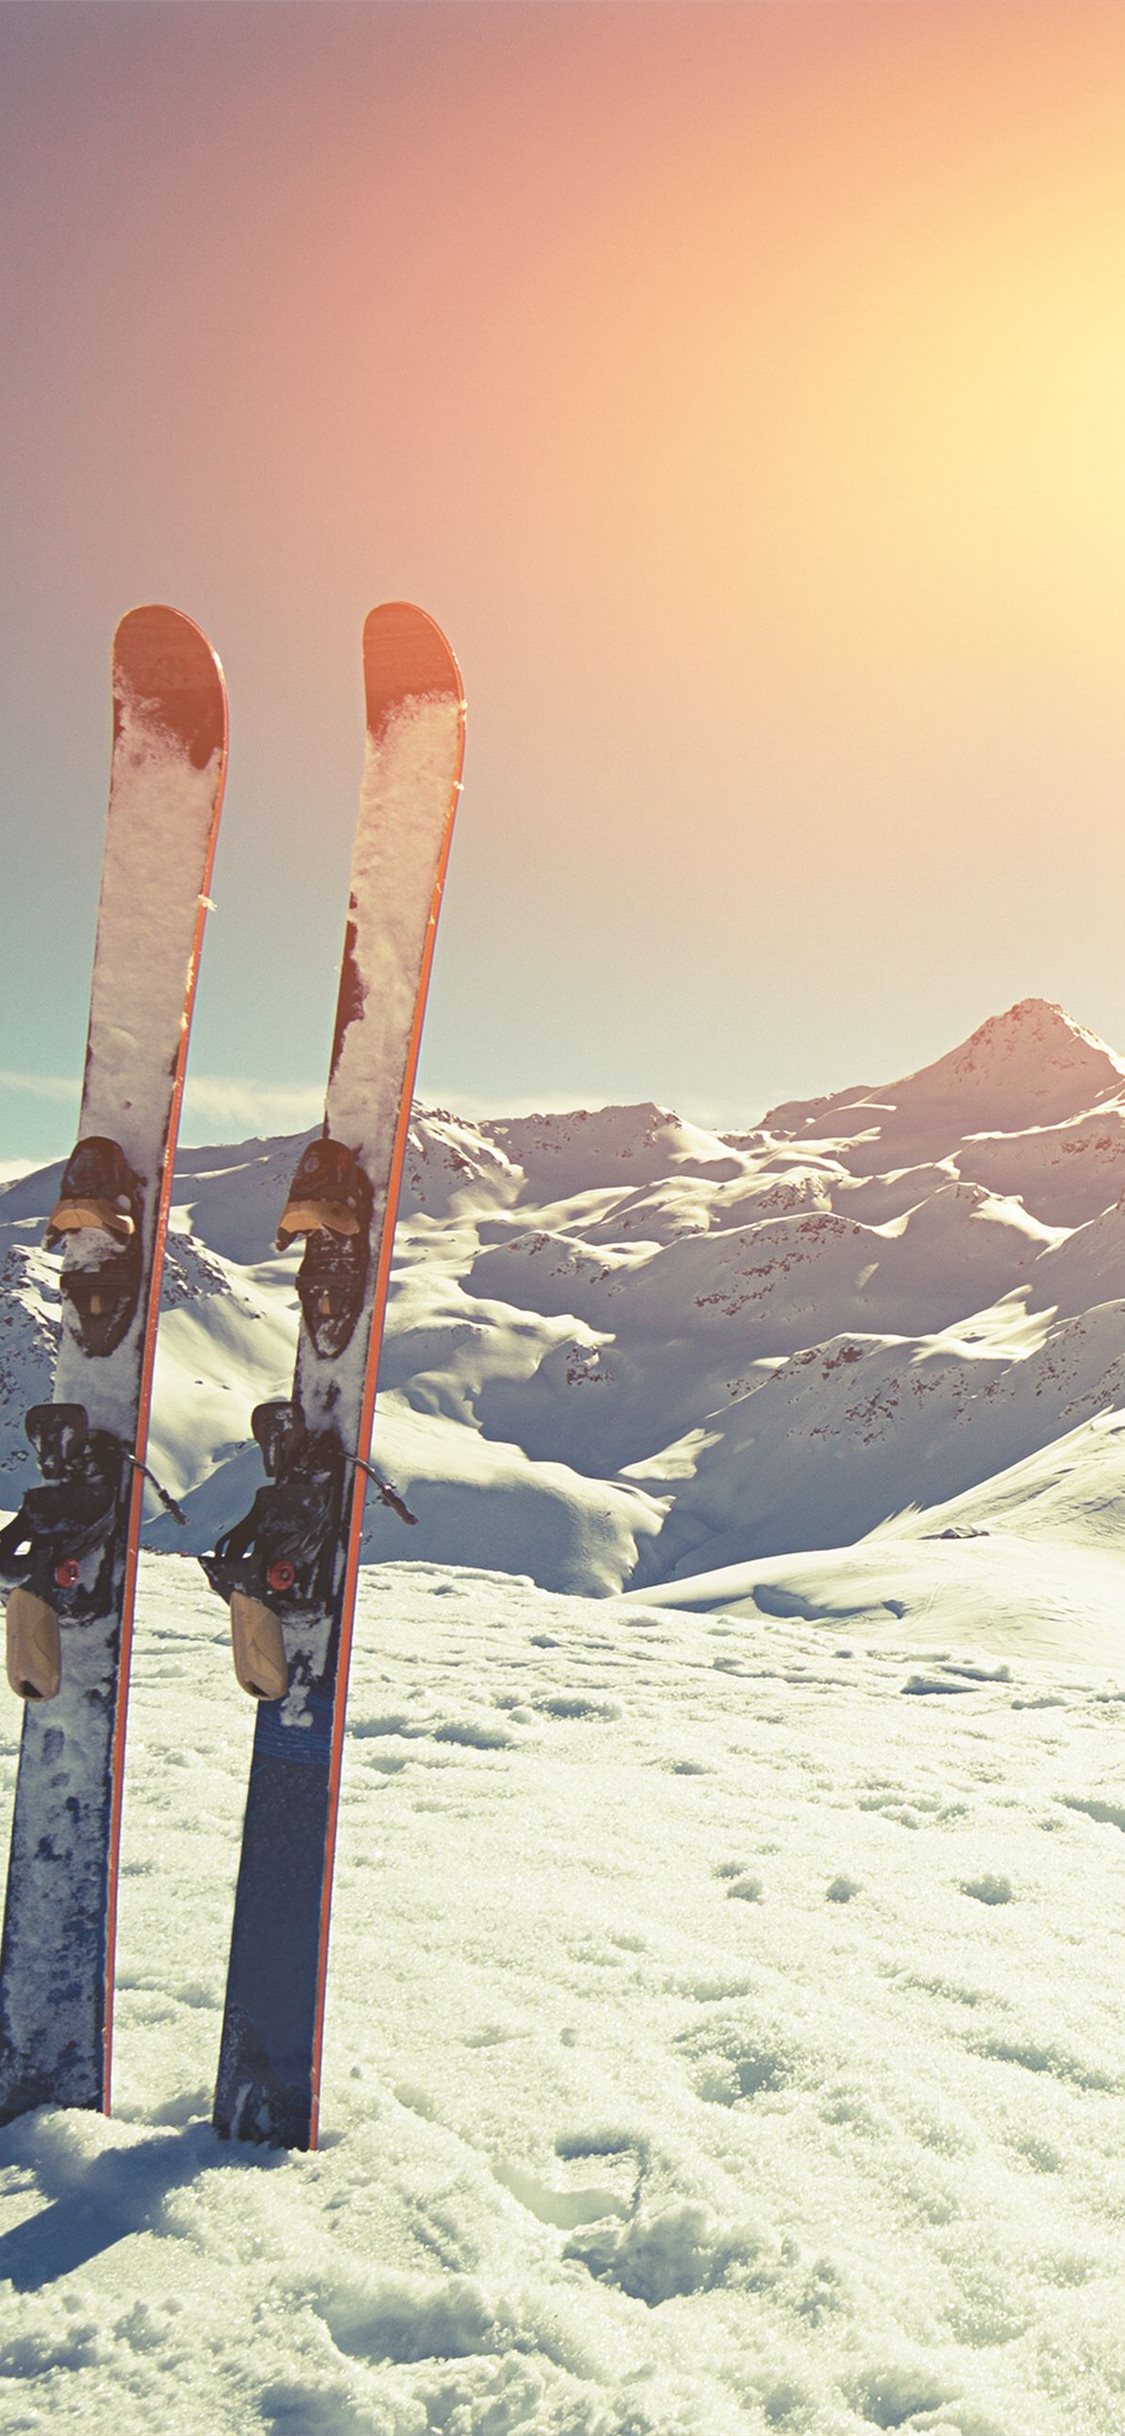 Skiing Photos Download The BEST Free Skiing Stock Photos  HD Images